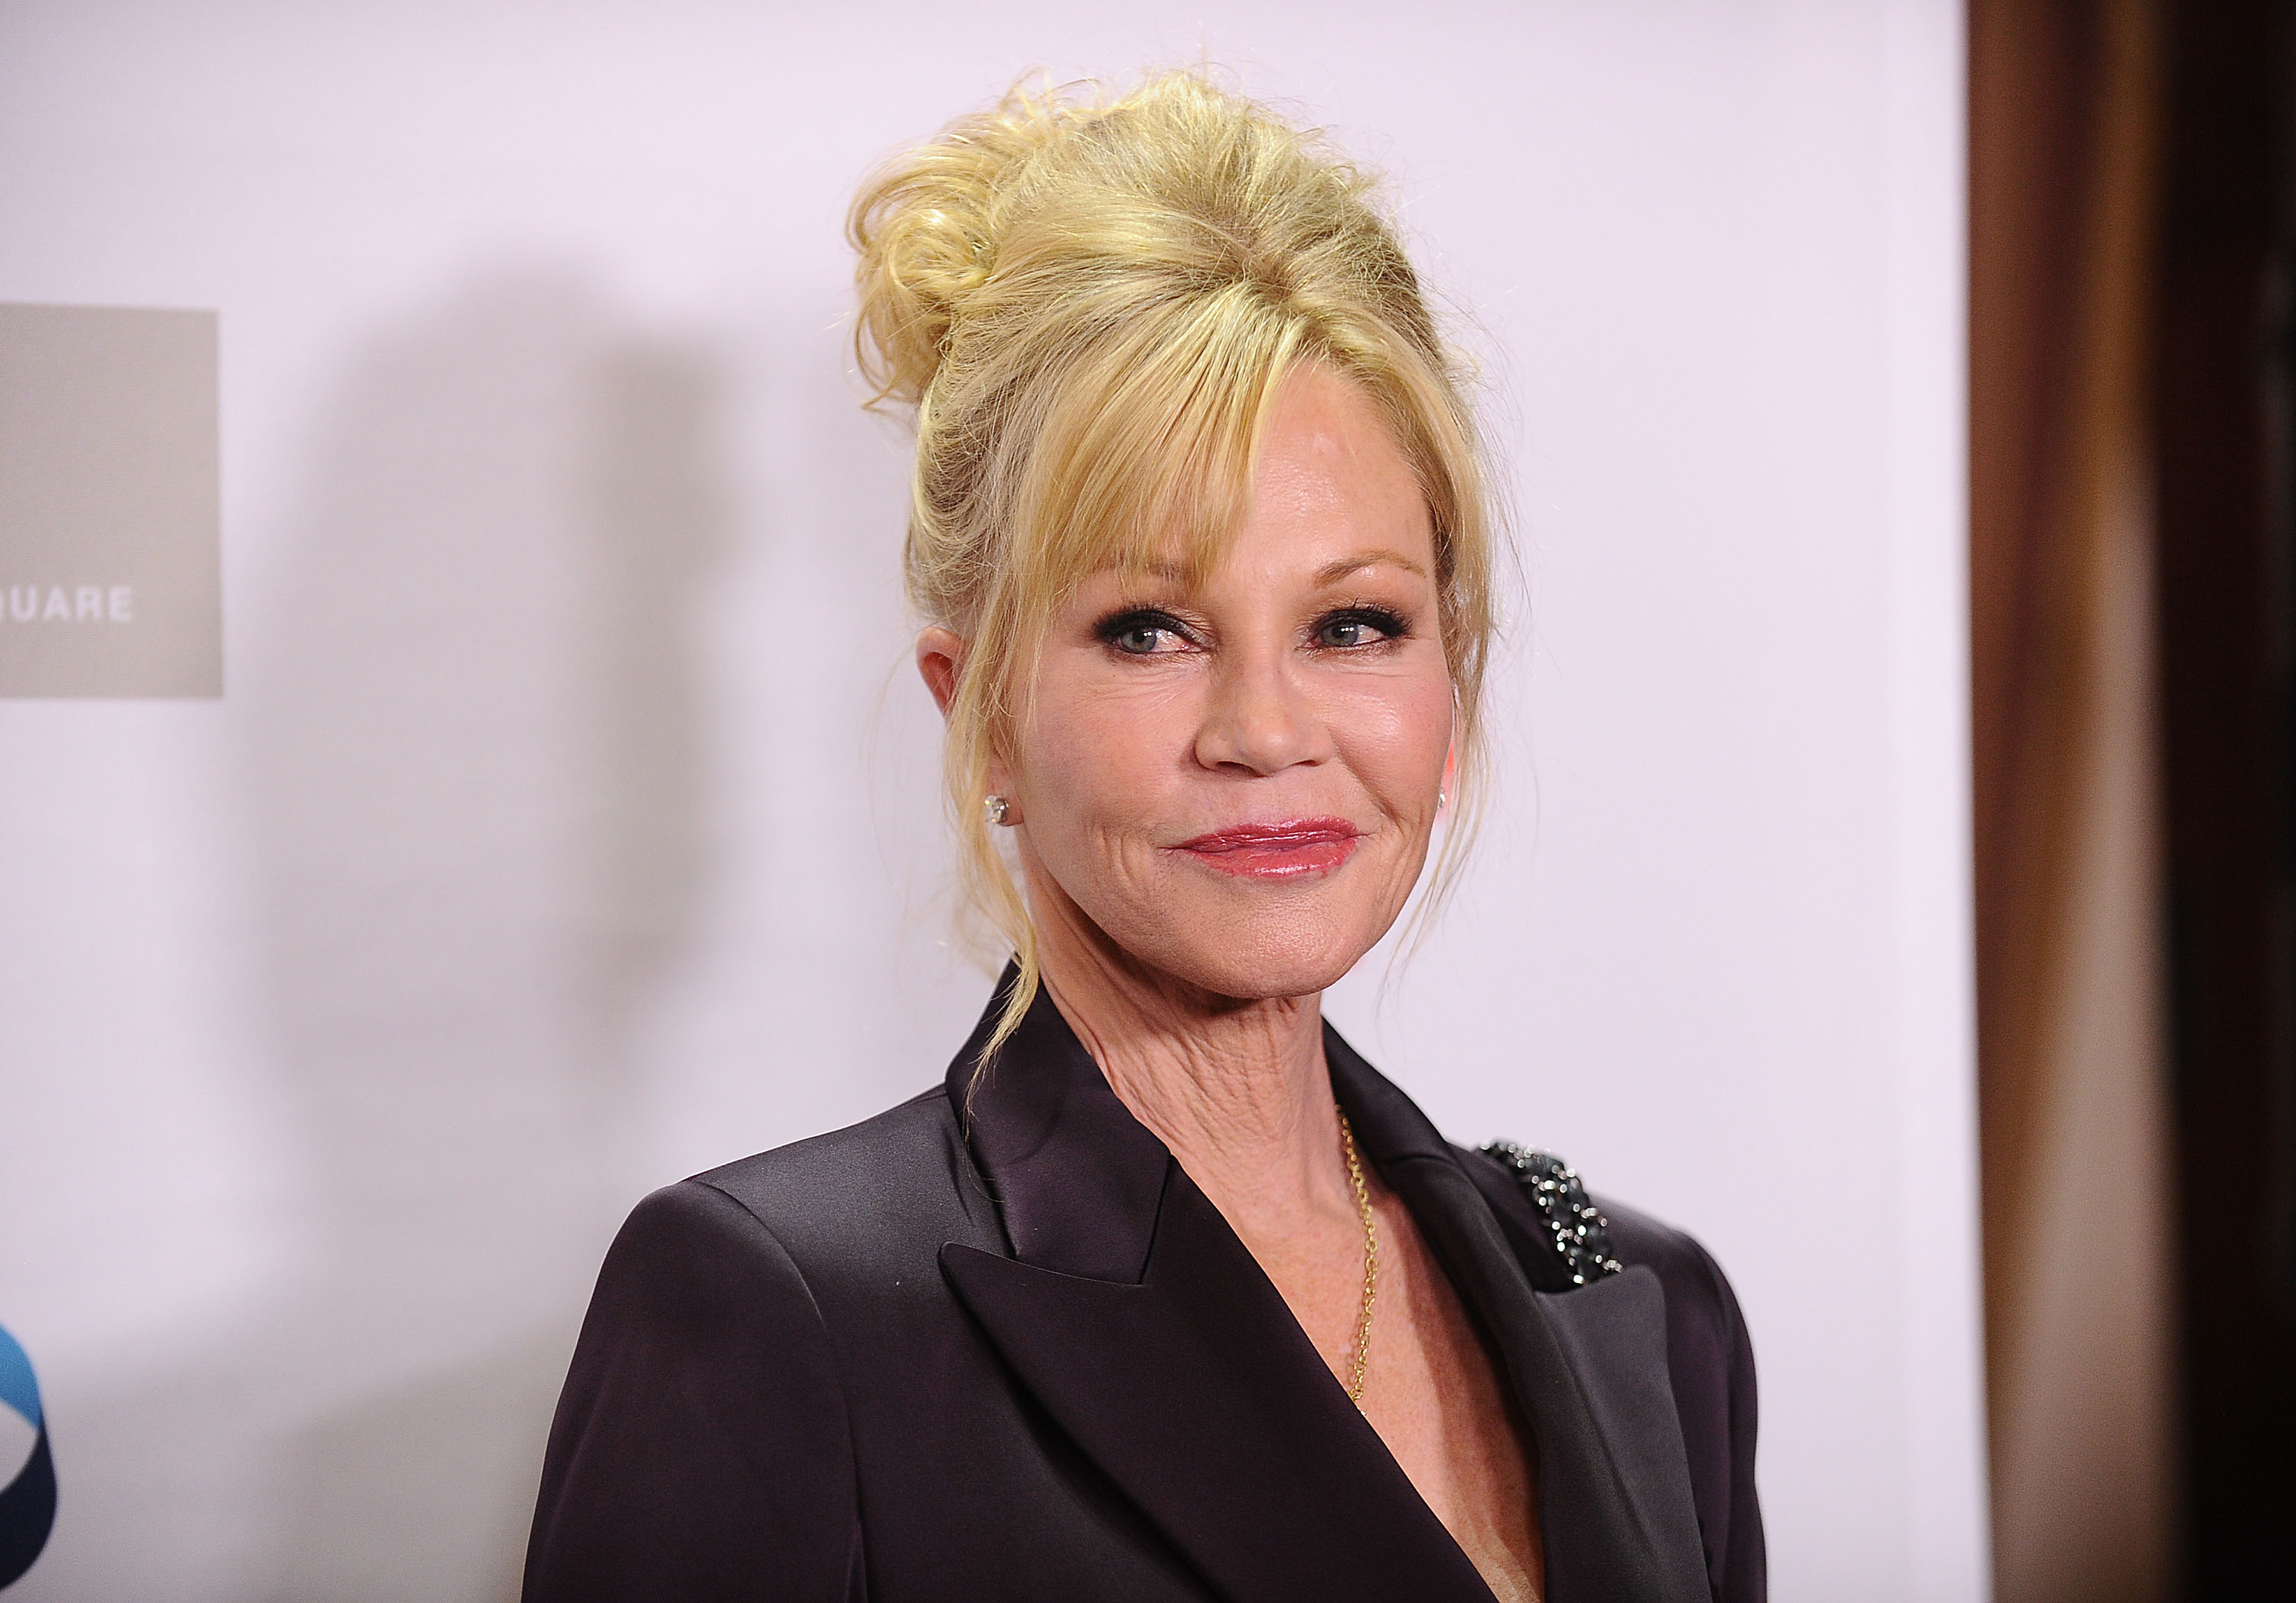 Melanie griffith images